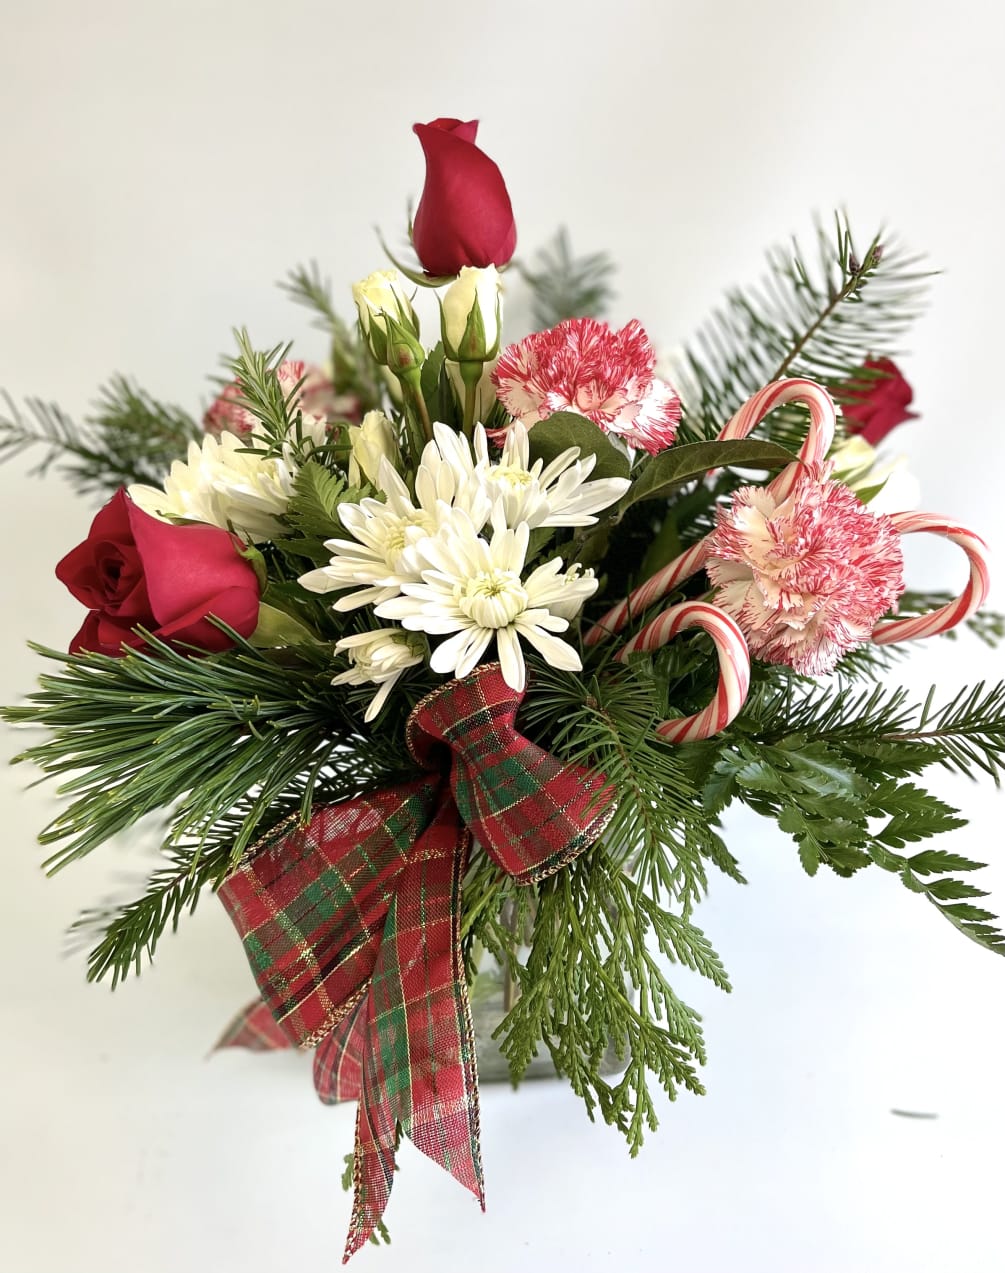 This sweet bouquet will bring a smile to anyones face this holiday